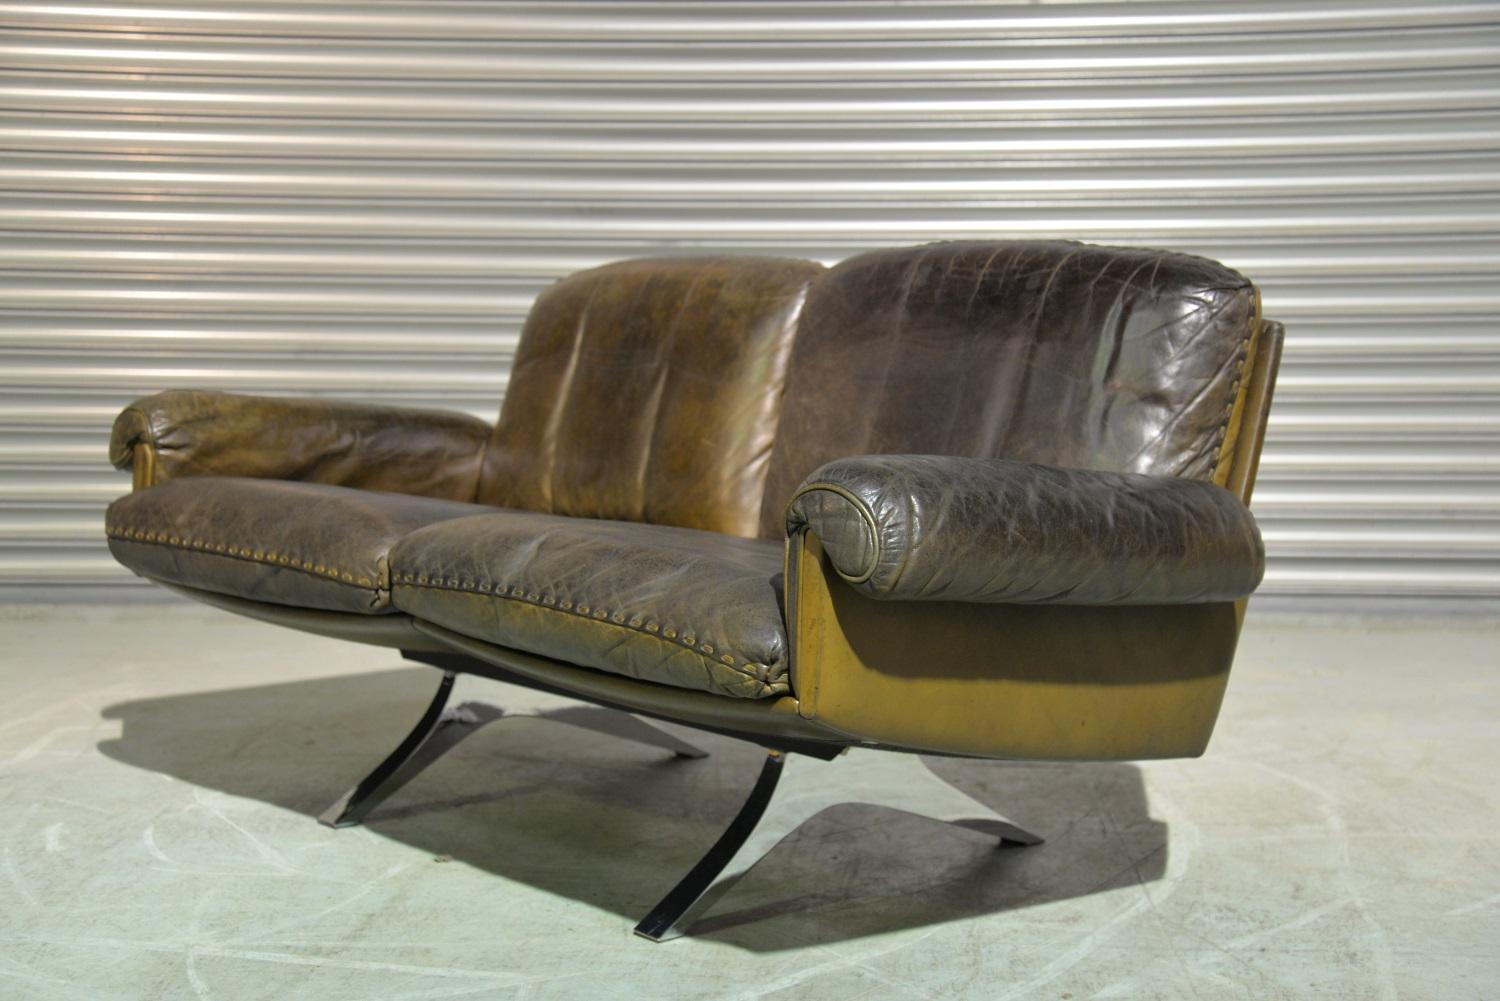 We are delighted to bring to you a vintage 1970s De Sede DS 31 two-seat sofa or loveseat in olive/brown aniline leather with superb whipstitch edge detail. Hand built circa 1970s by De Sede craftsman in Switzerland, the sofa or loveseat sits on